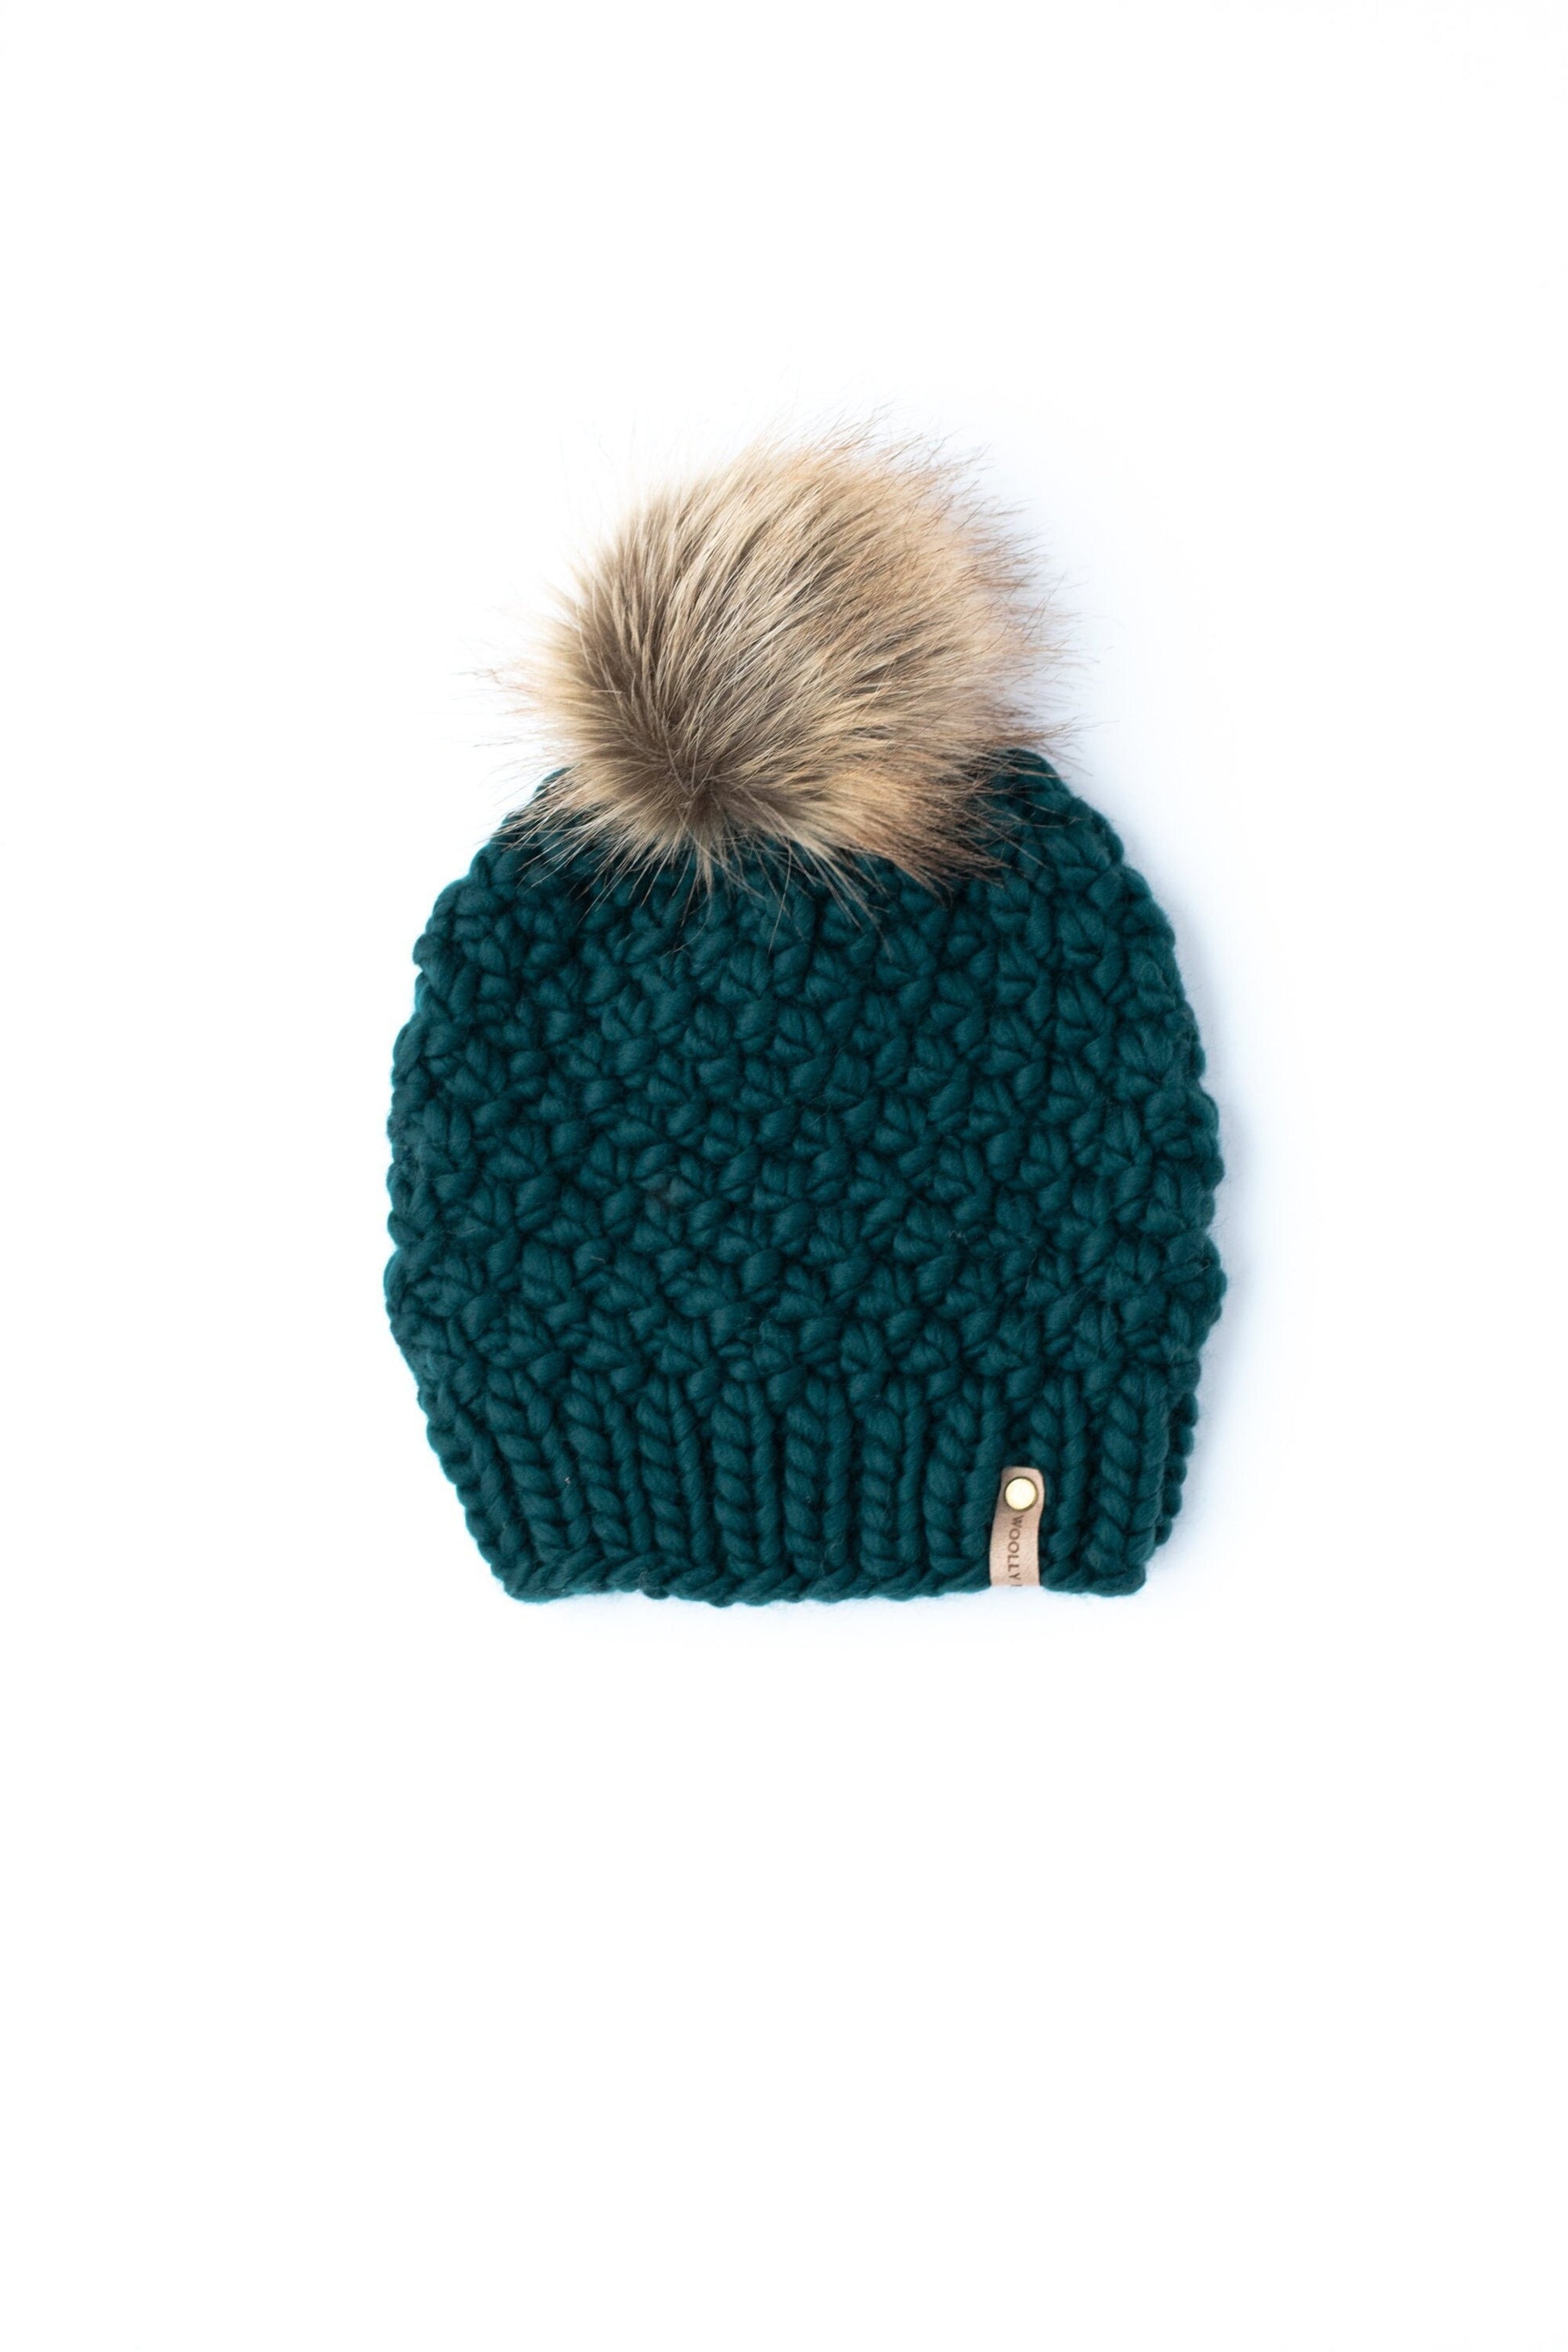 Forest Green Peruvian Wool Knit Hat with Faux Fur Pom Pom – Woolly Bear  Knits